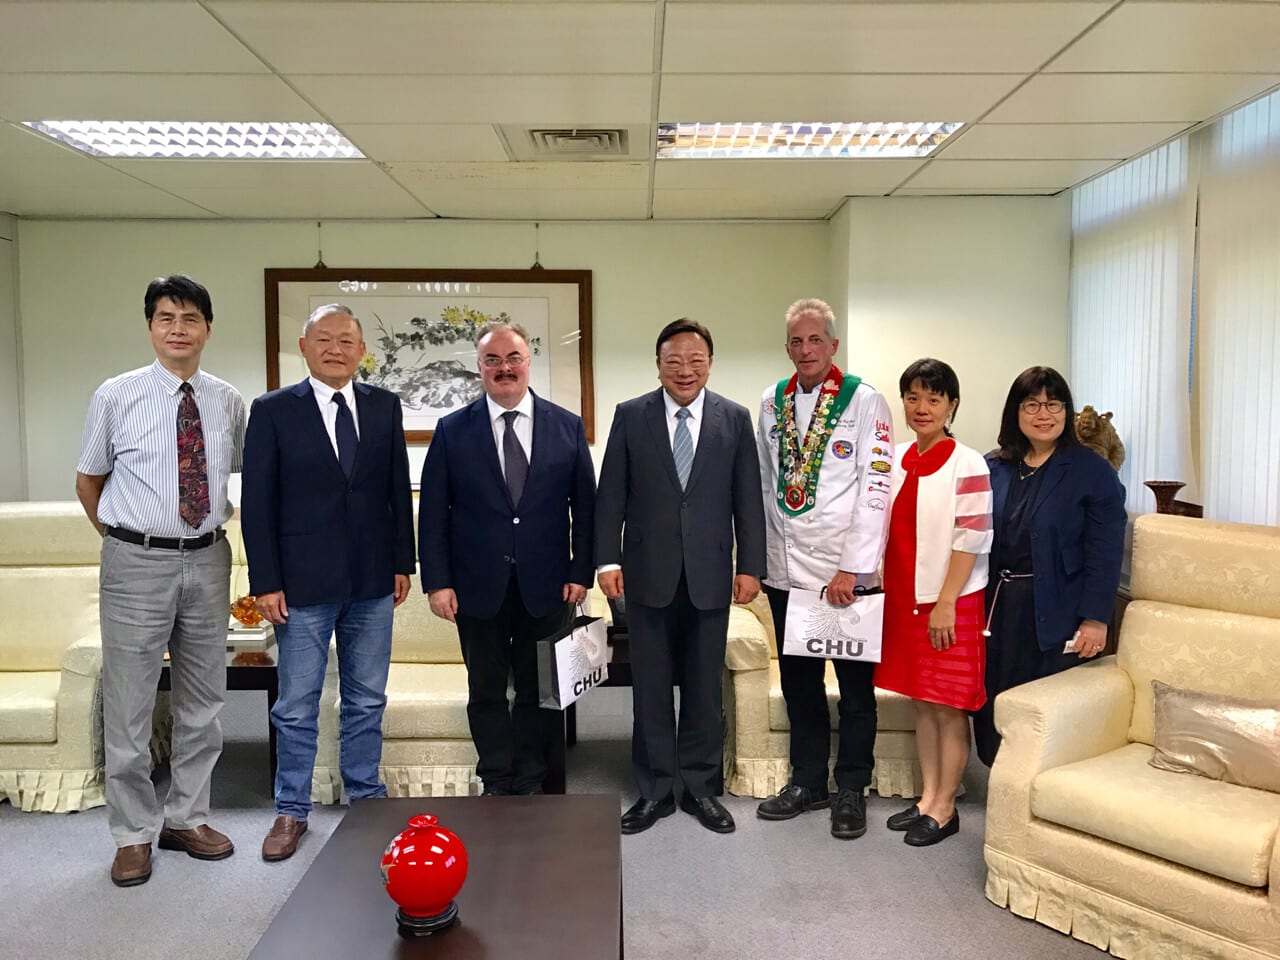 Meeting President of CHU discuss further partnership strategy